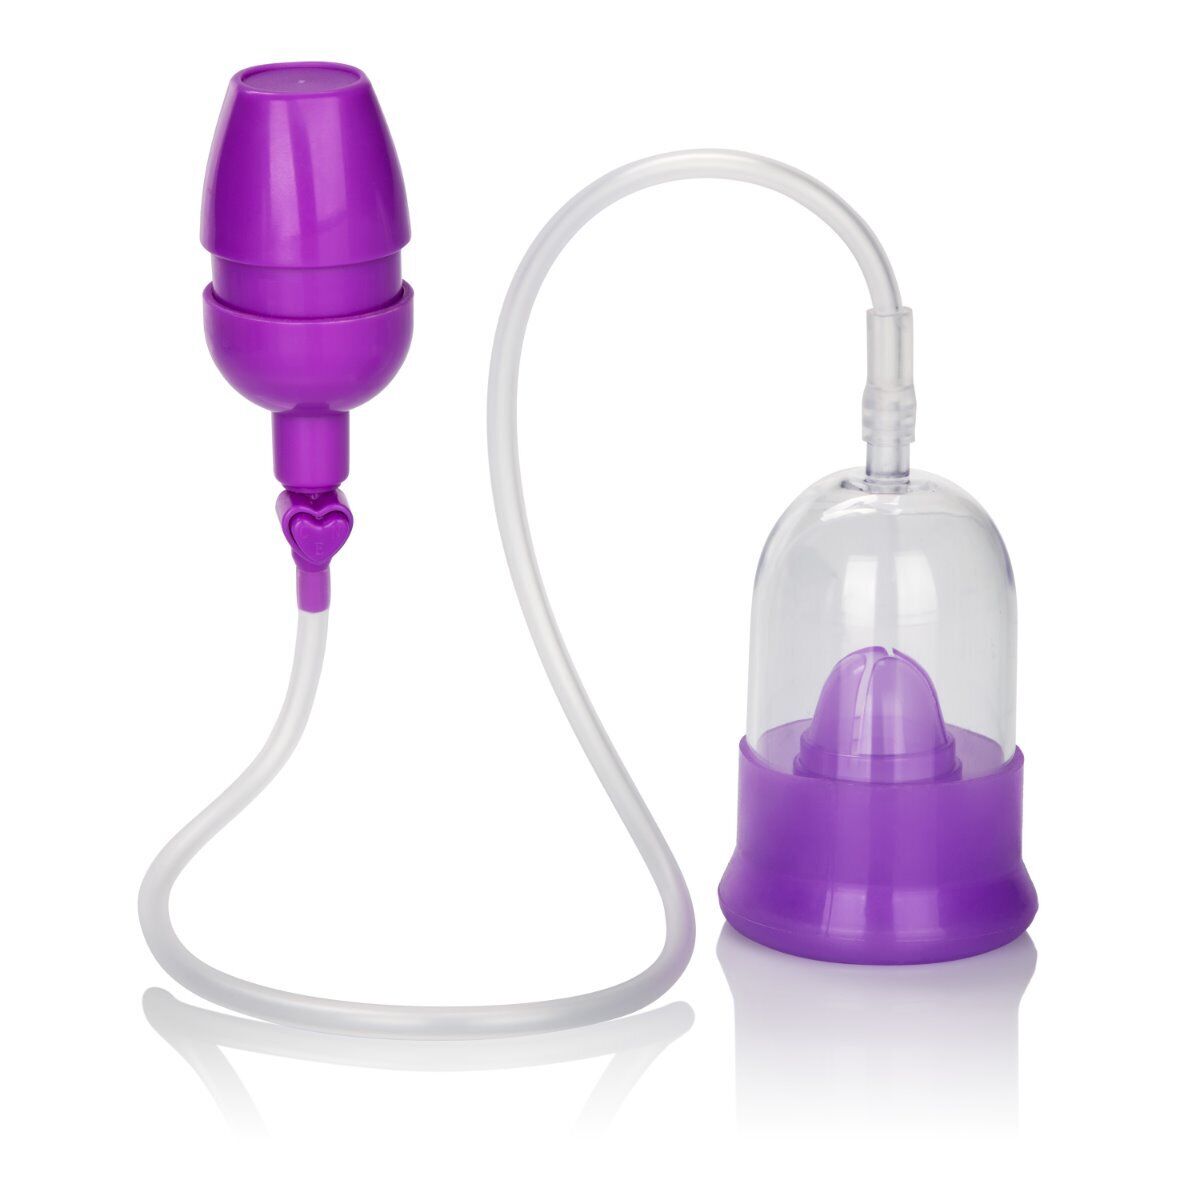 Intimate Vaginal Clitoral Pump Pussy Pump Sucker Sex-toys for Women